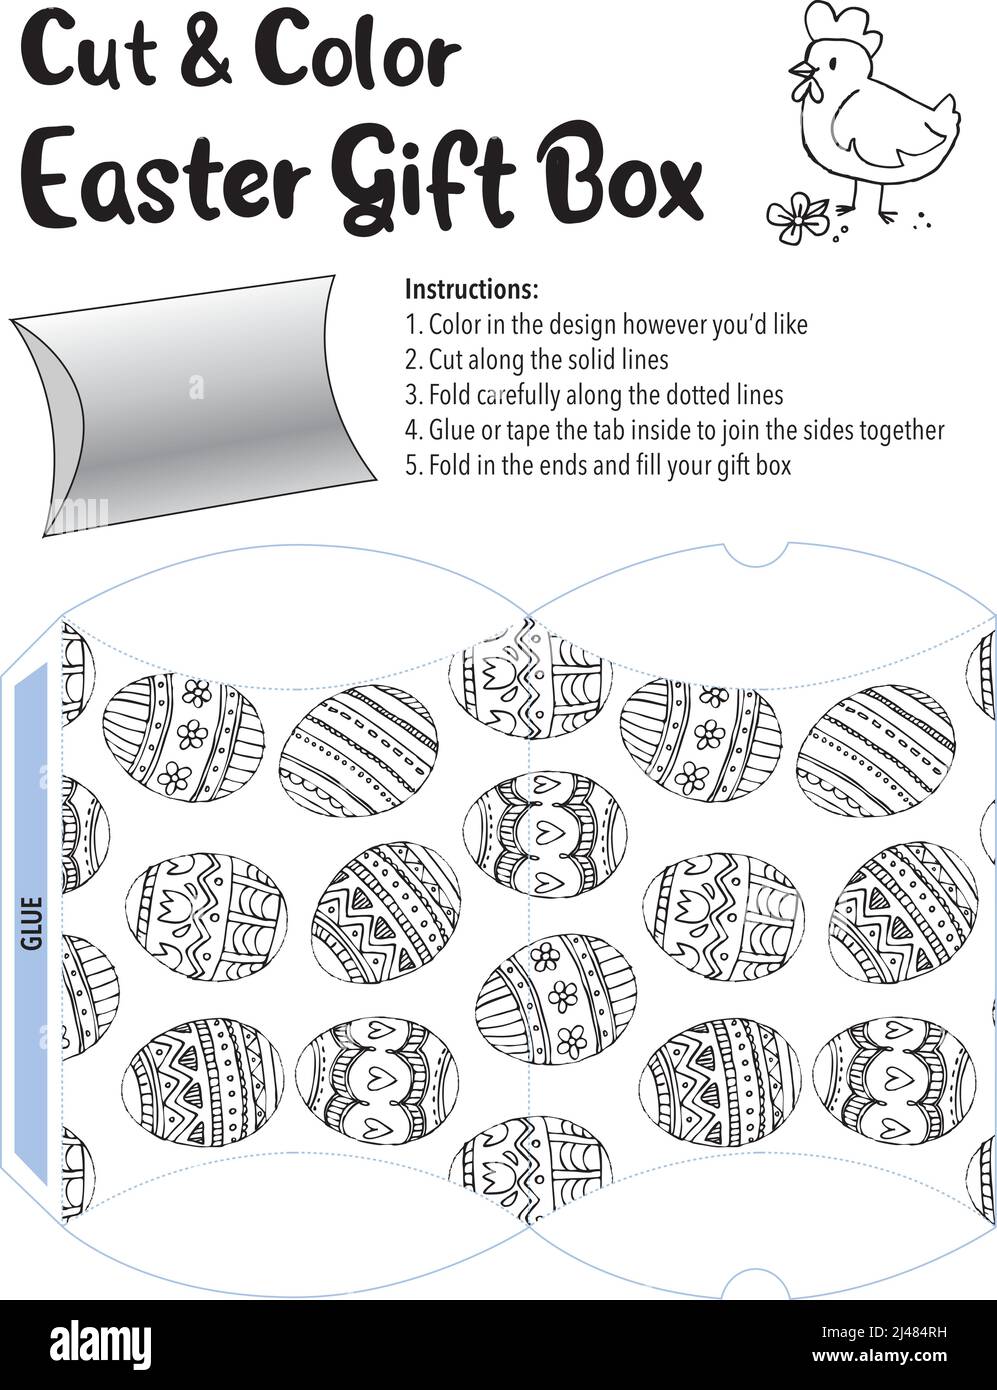 Cut and Color Easter Gift Box Stock Vector